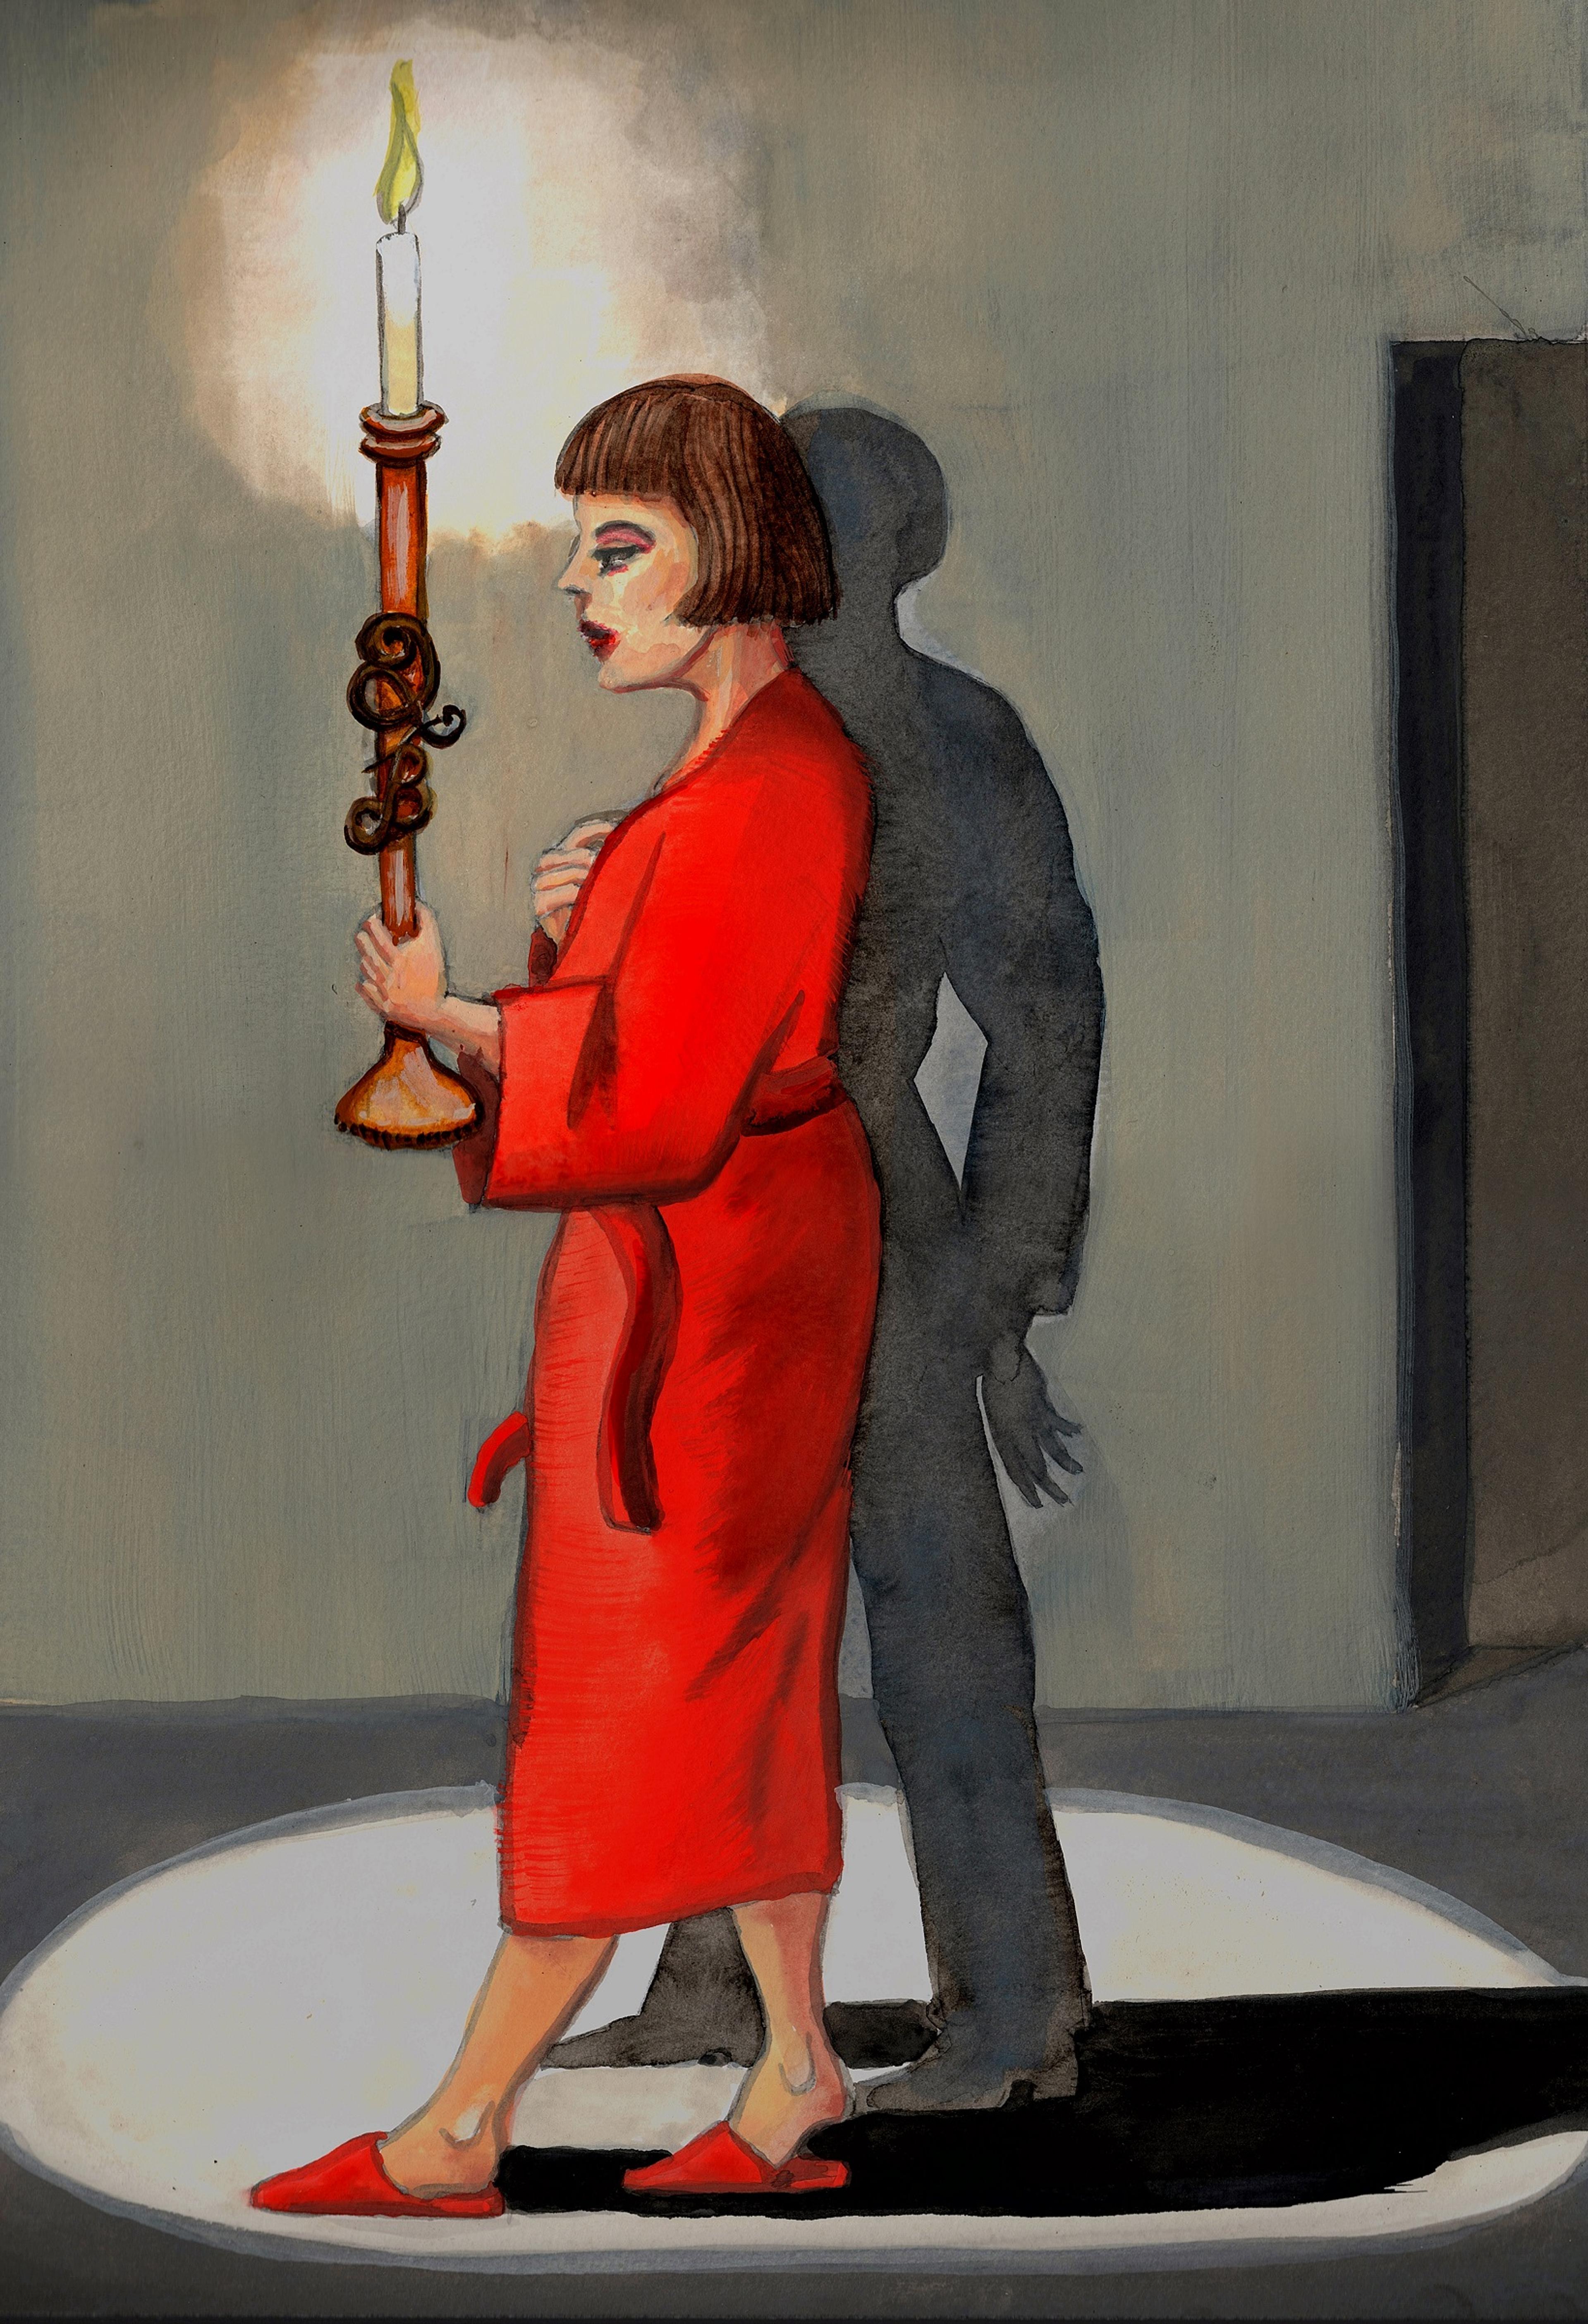 Illustration of a person in a red dressing down holding a candle stick with the letters 'QB' and a shadowy figure behind